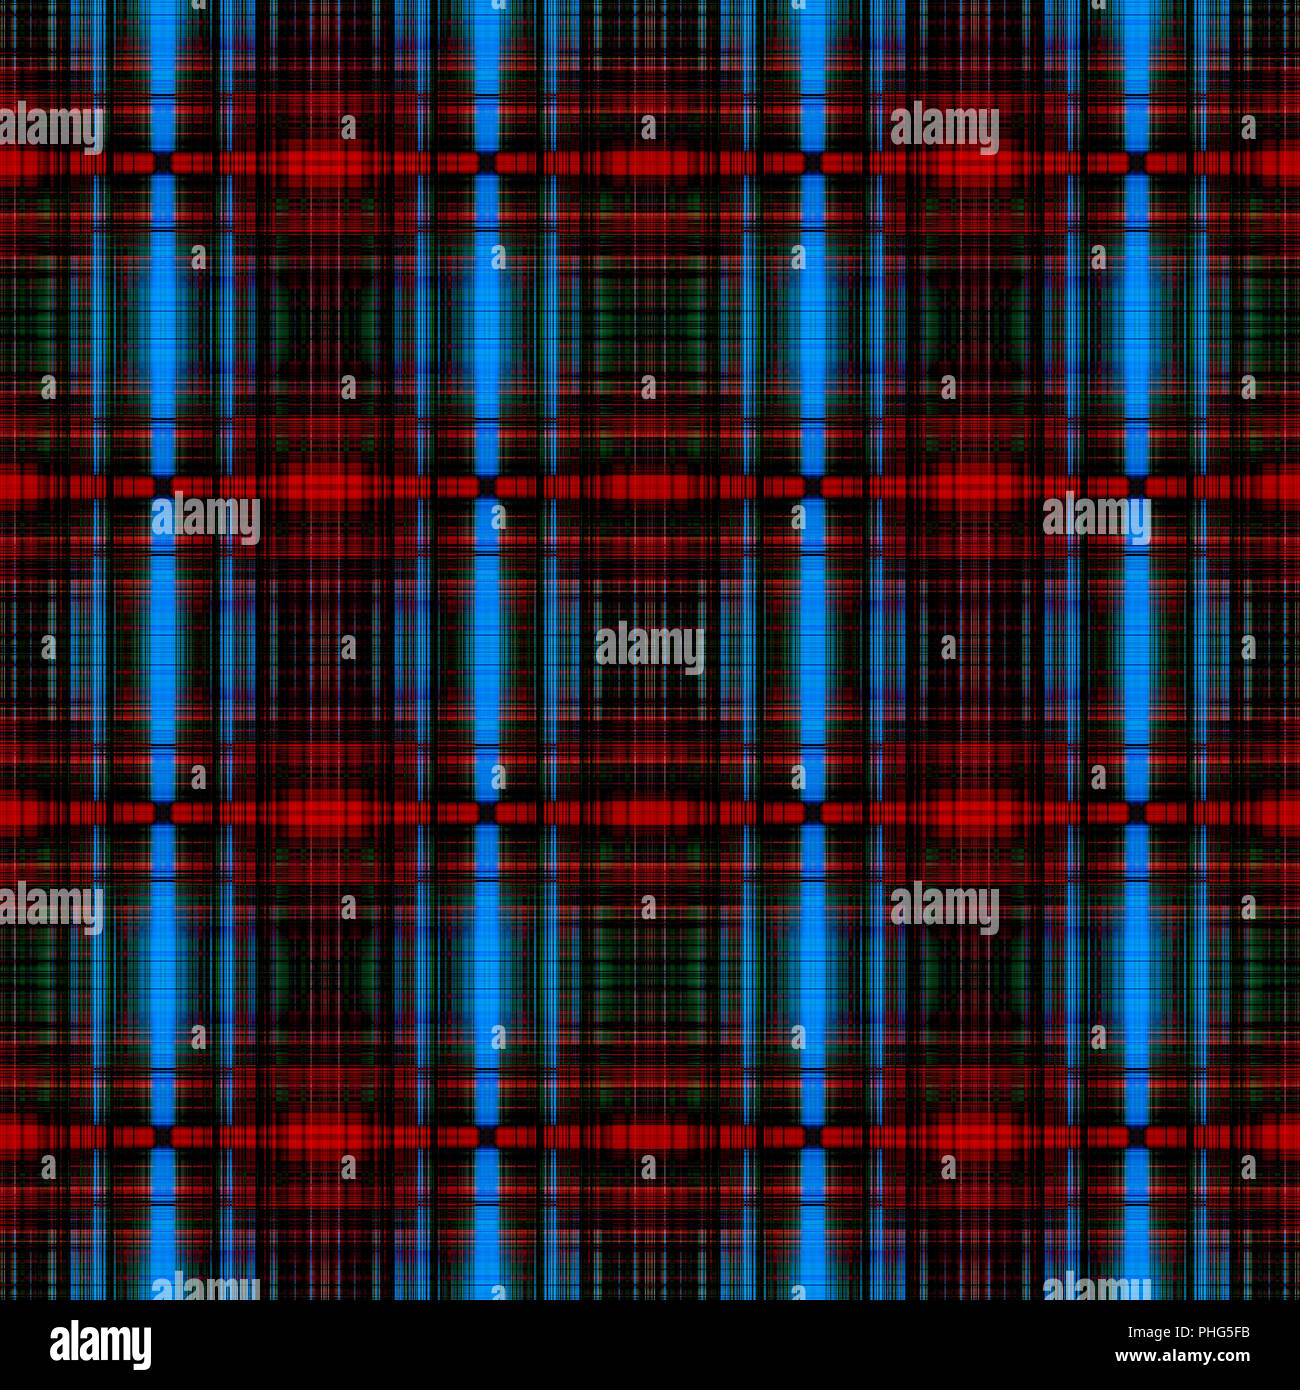 Blue and red grid pattern Stock Photo